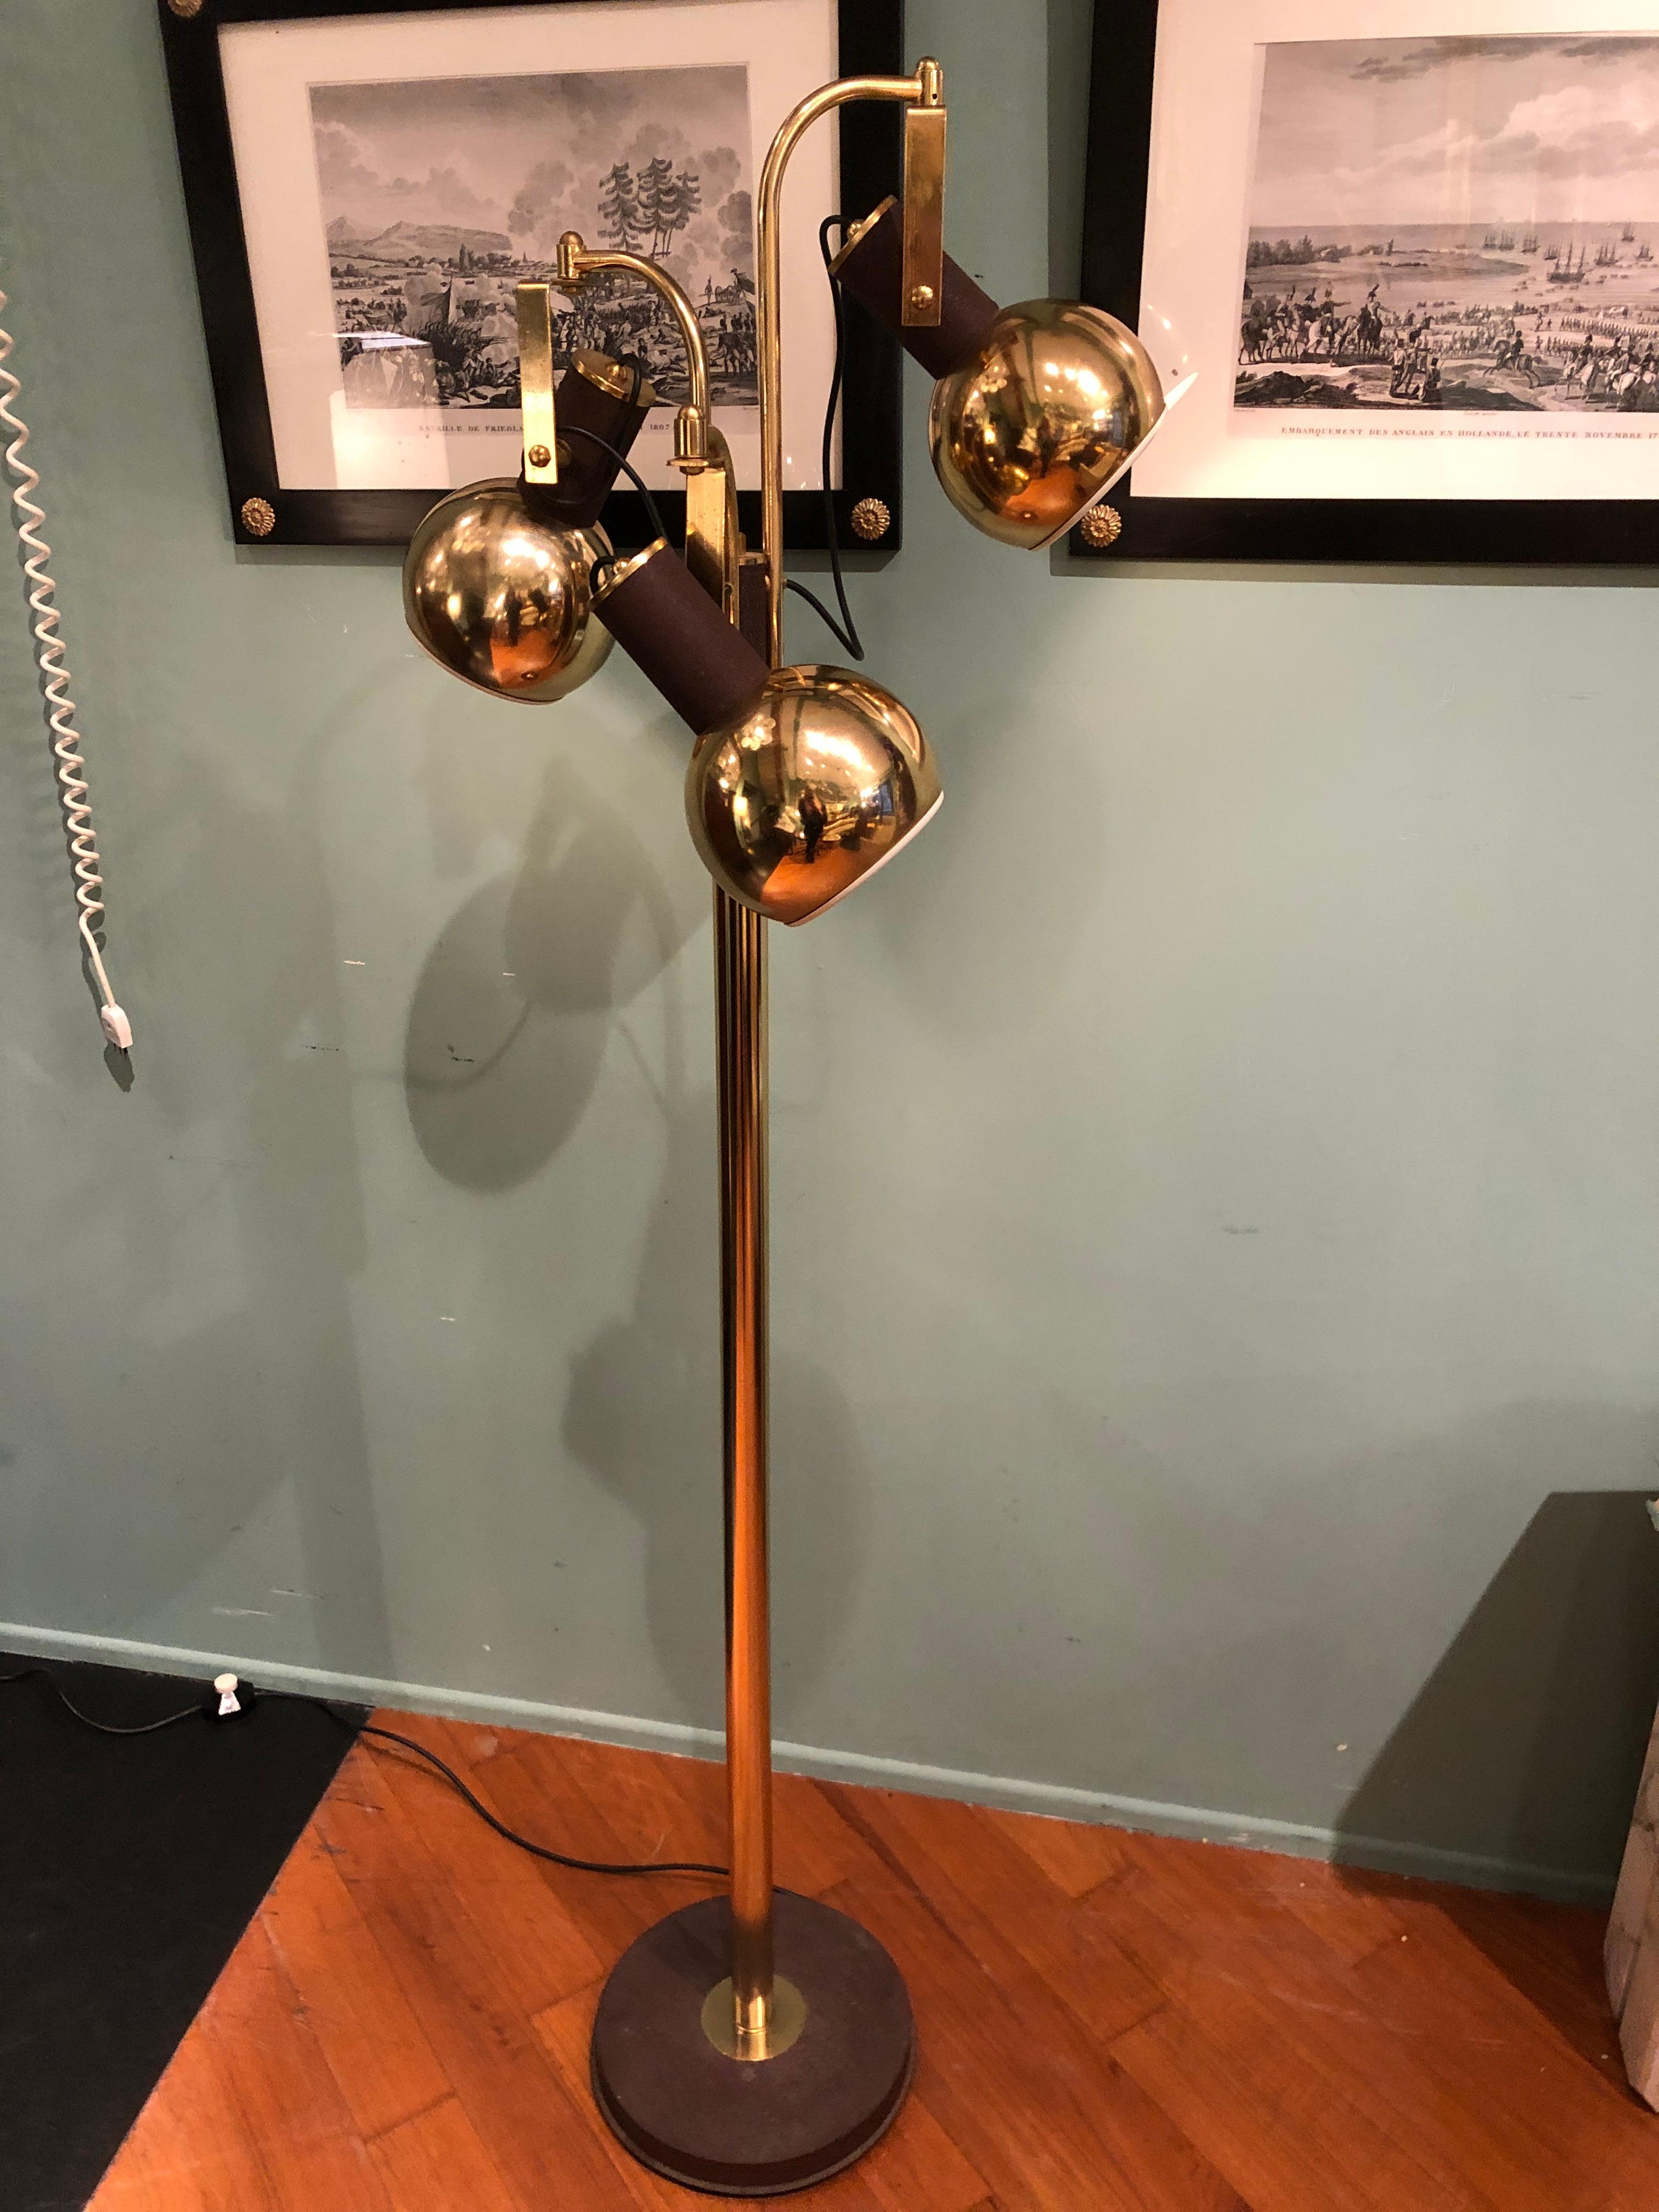 Reading floor lamp with three spherical shaped lights that can be adjusted to point light up or down. The structure is made of brass and the rounded base is made of iron with rusty color. This lamp shows very good conditions with wears coherent with